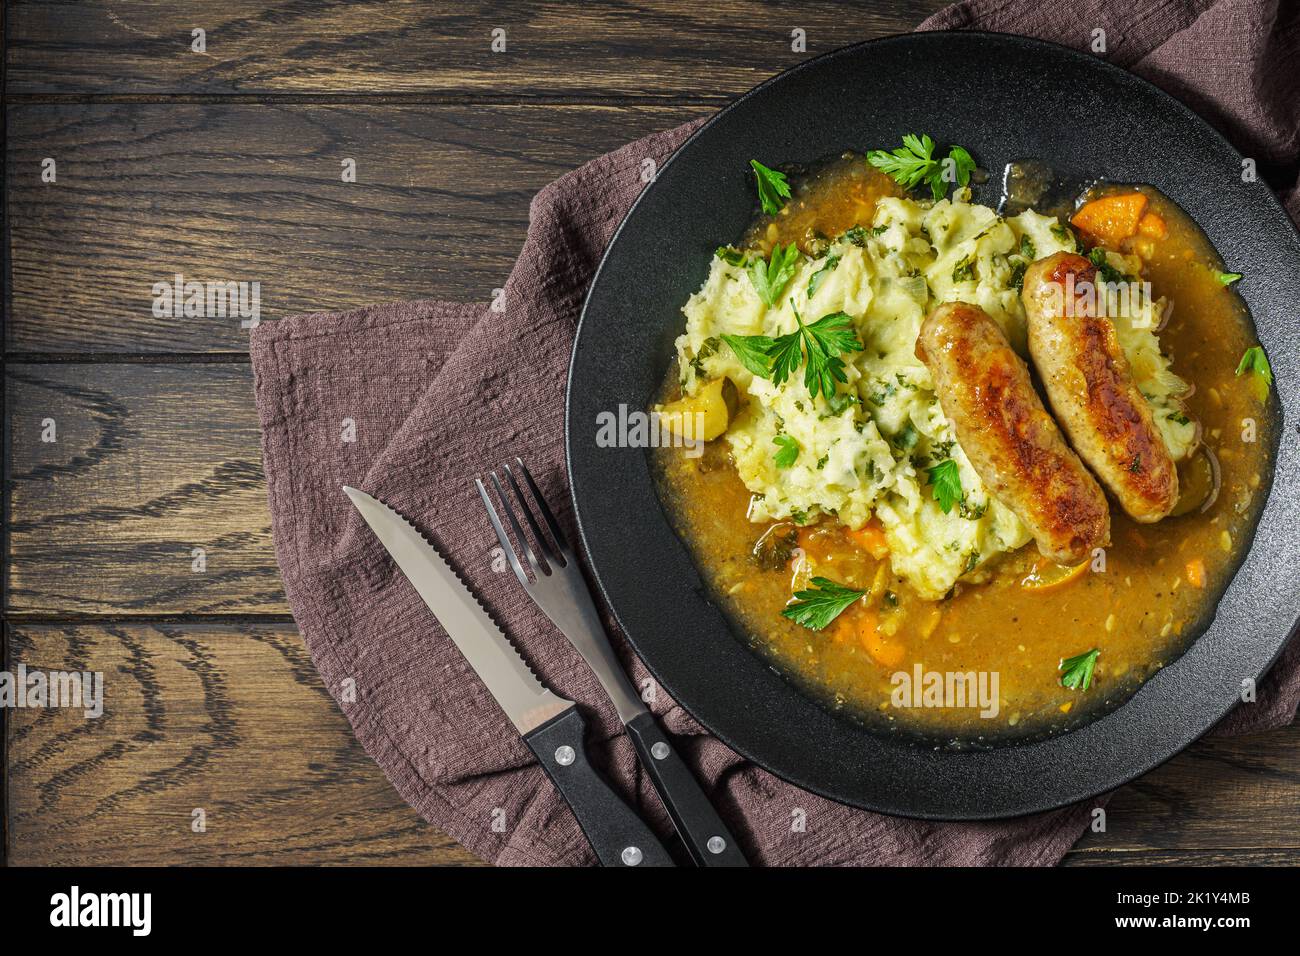 Dutch stamppot of potatoes, kale and sausages with gravy on plate, top view with copy space Stock Photo